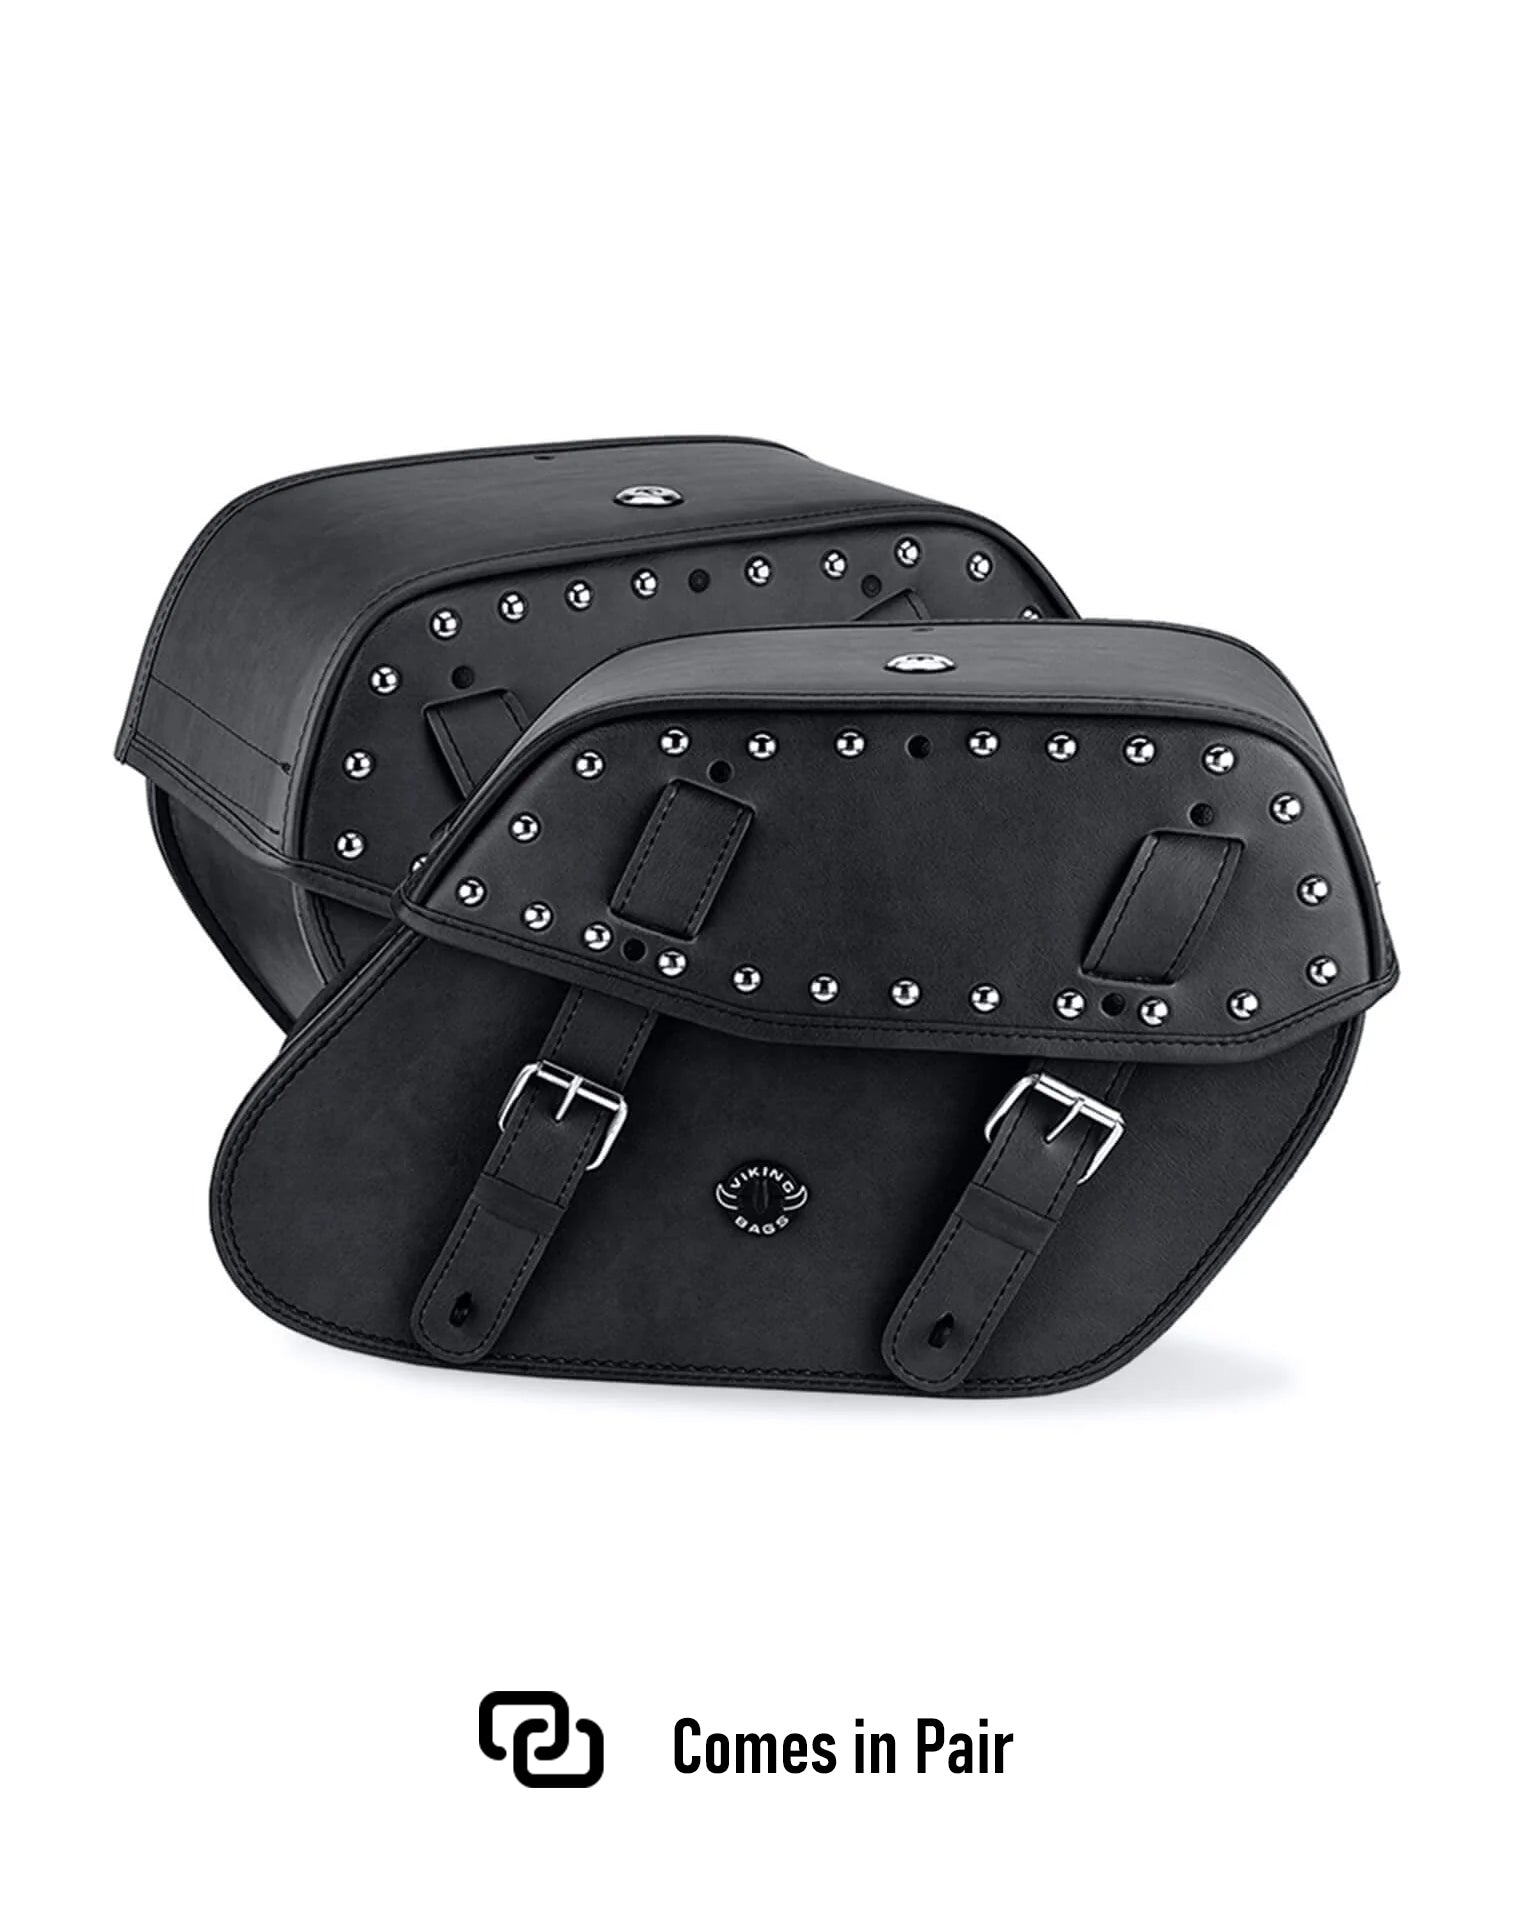 Viking Odin Large Kawasaki Mean Streak 1600 Studded Leather Motorcycle Saddlebags Weather Resistant Bags Comes in Pair